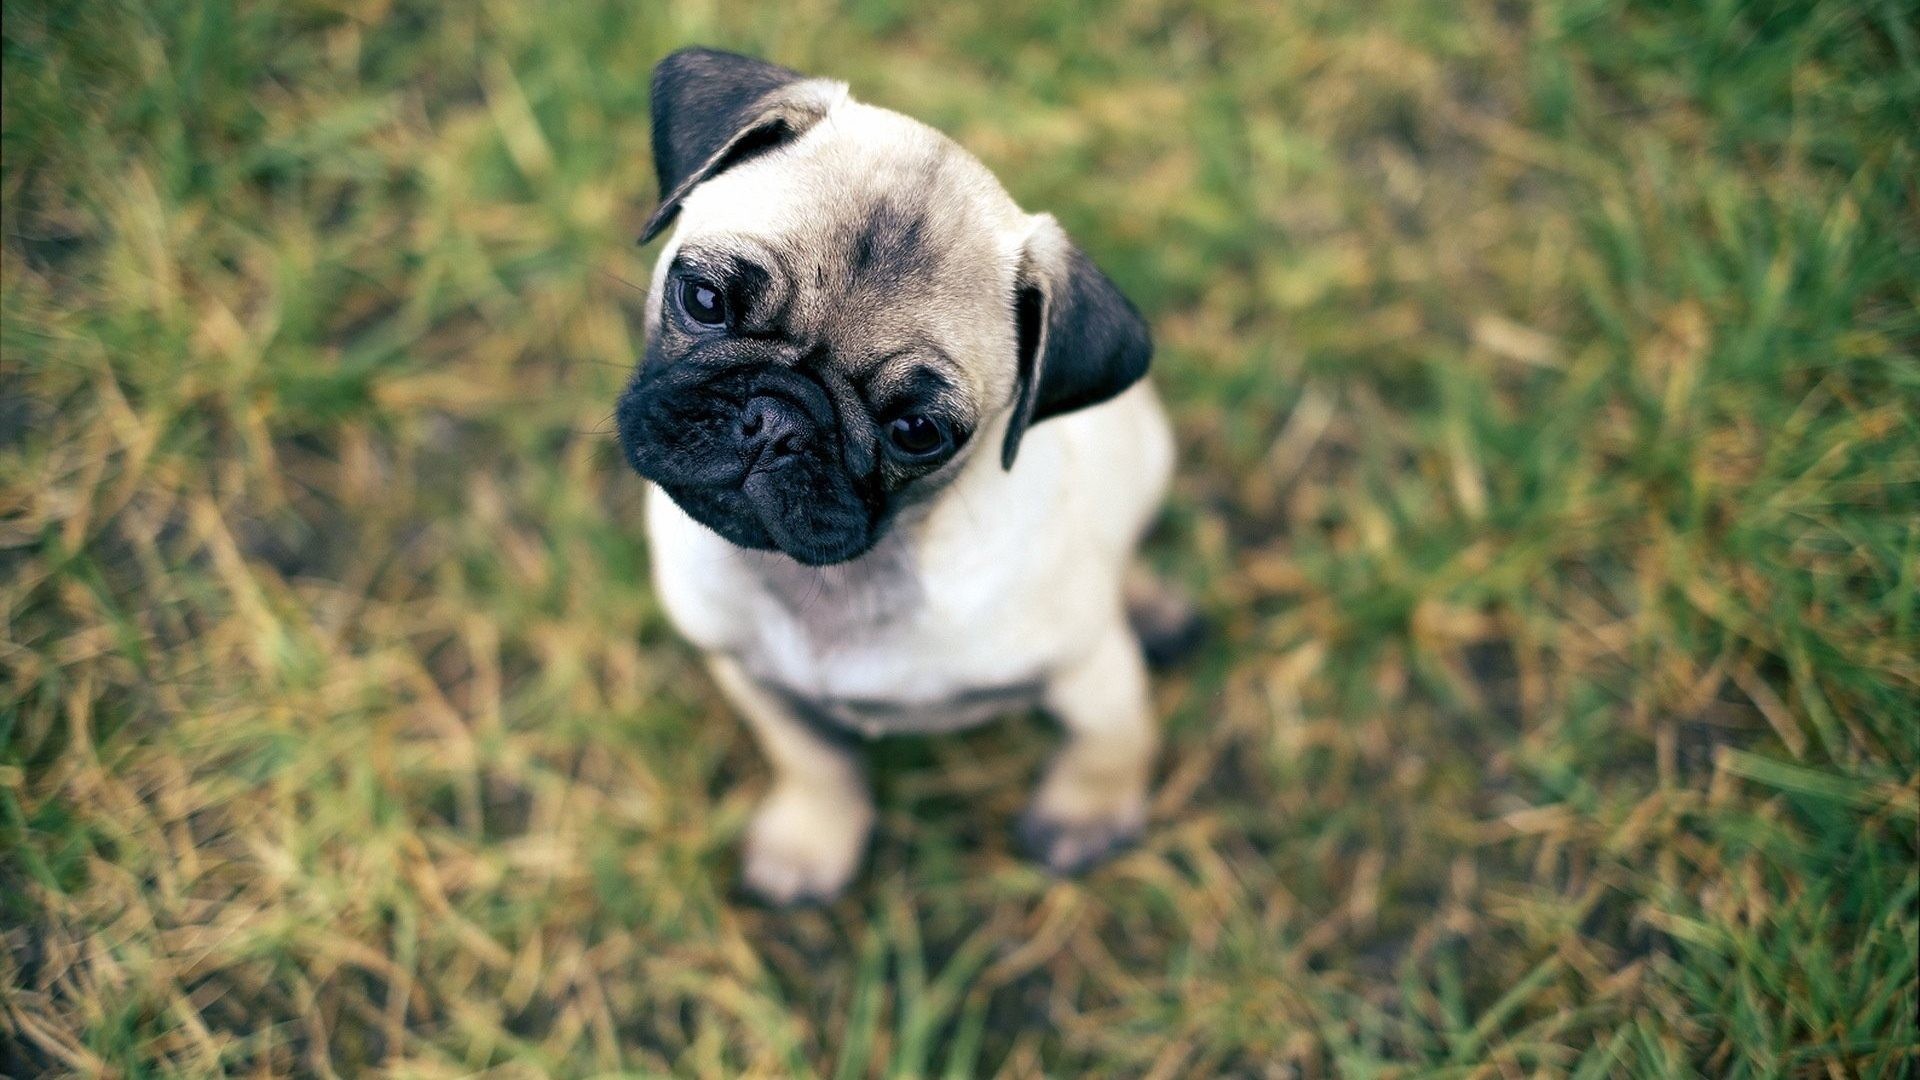 1920x1080 Pug Tag - Puppy Dog Pug Baby Animals Desktop Images for HD 16:9 High